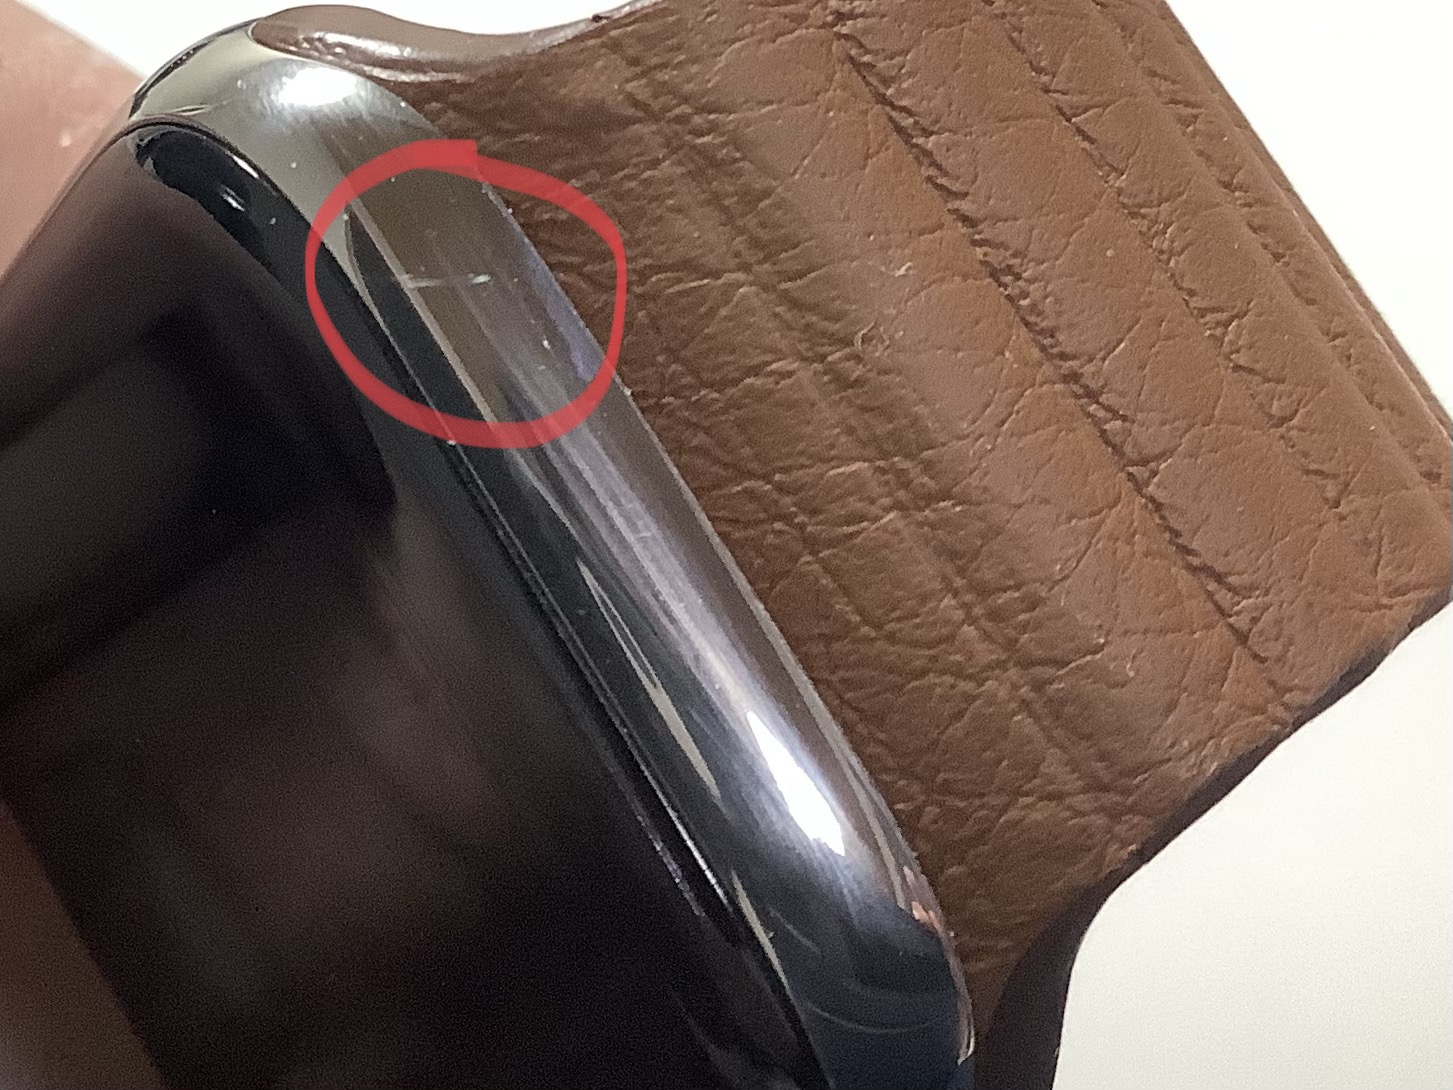 Scratched face on series 6 watch - Apple Community